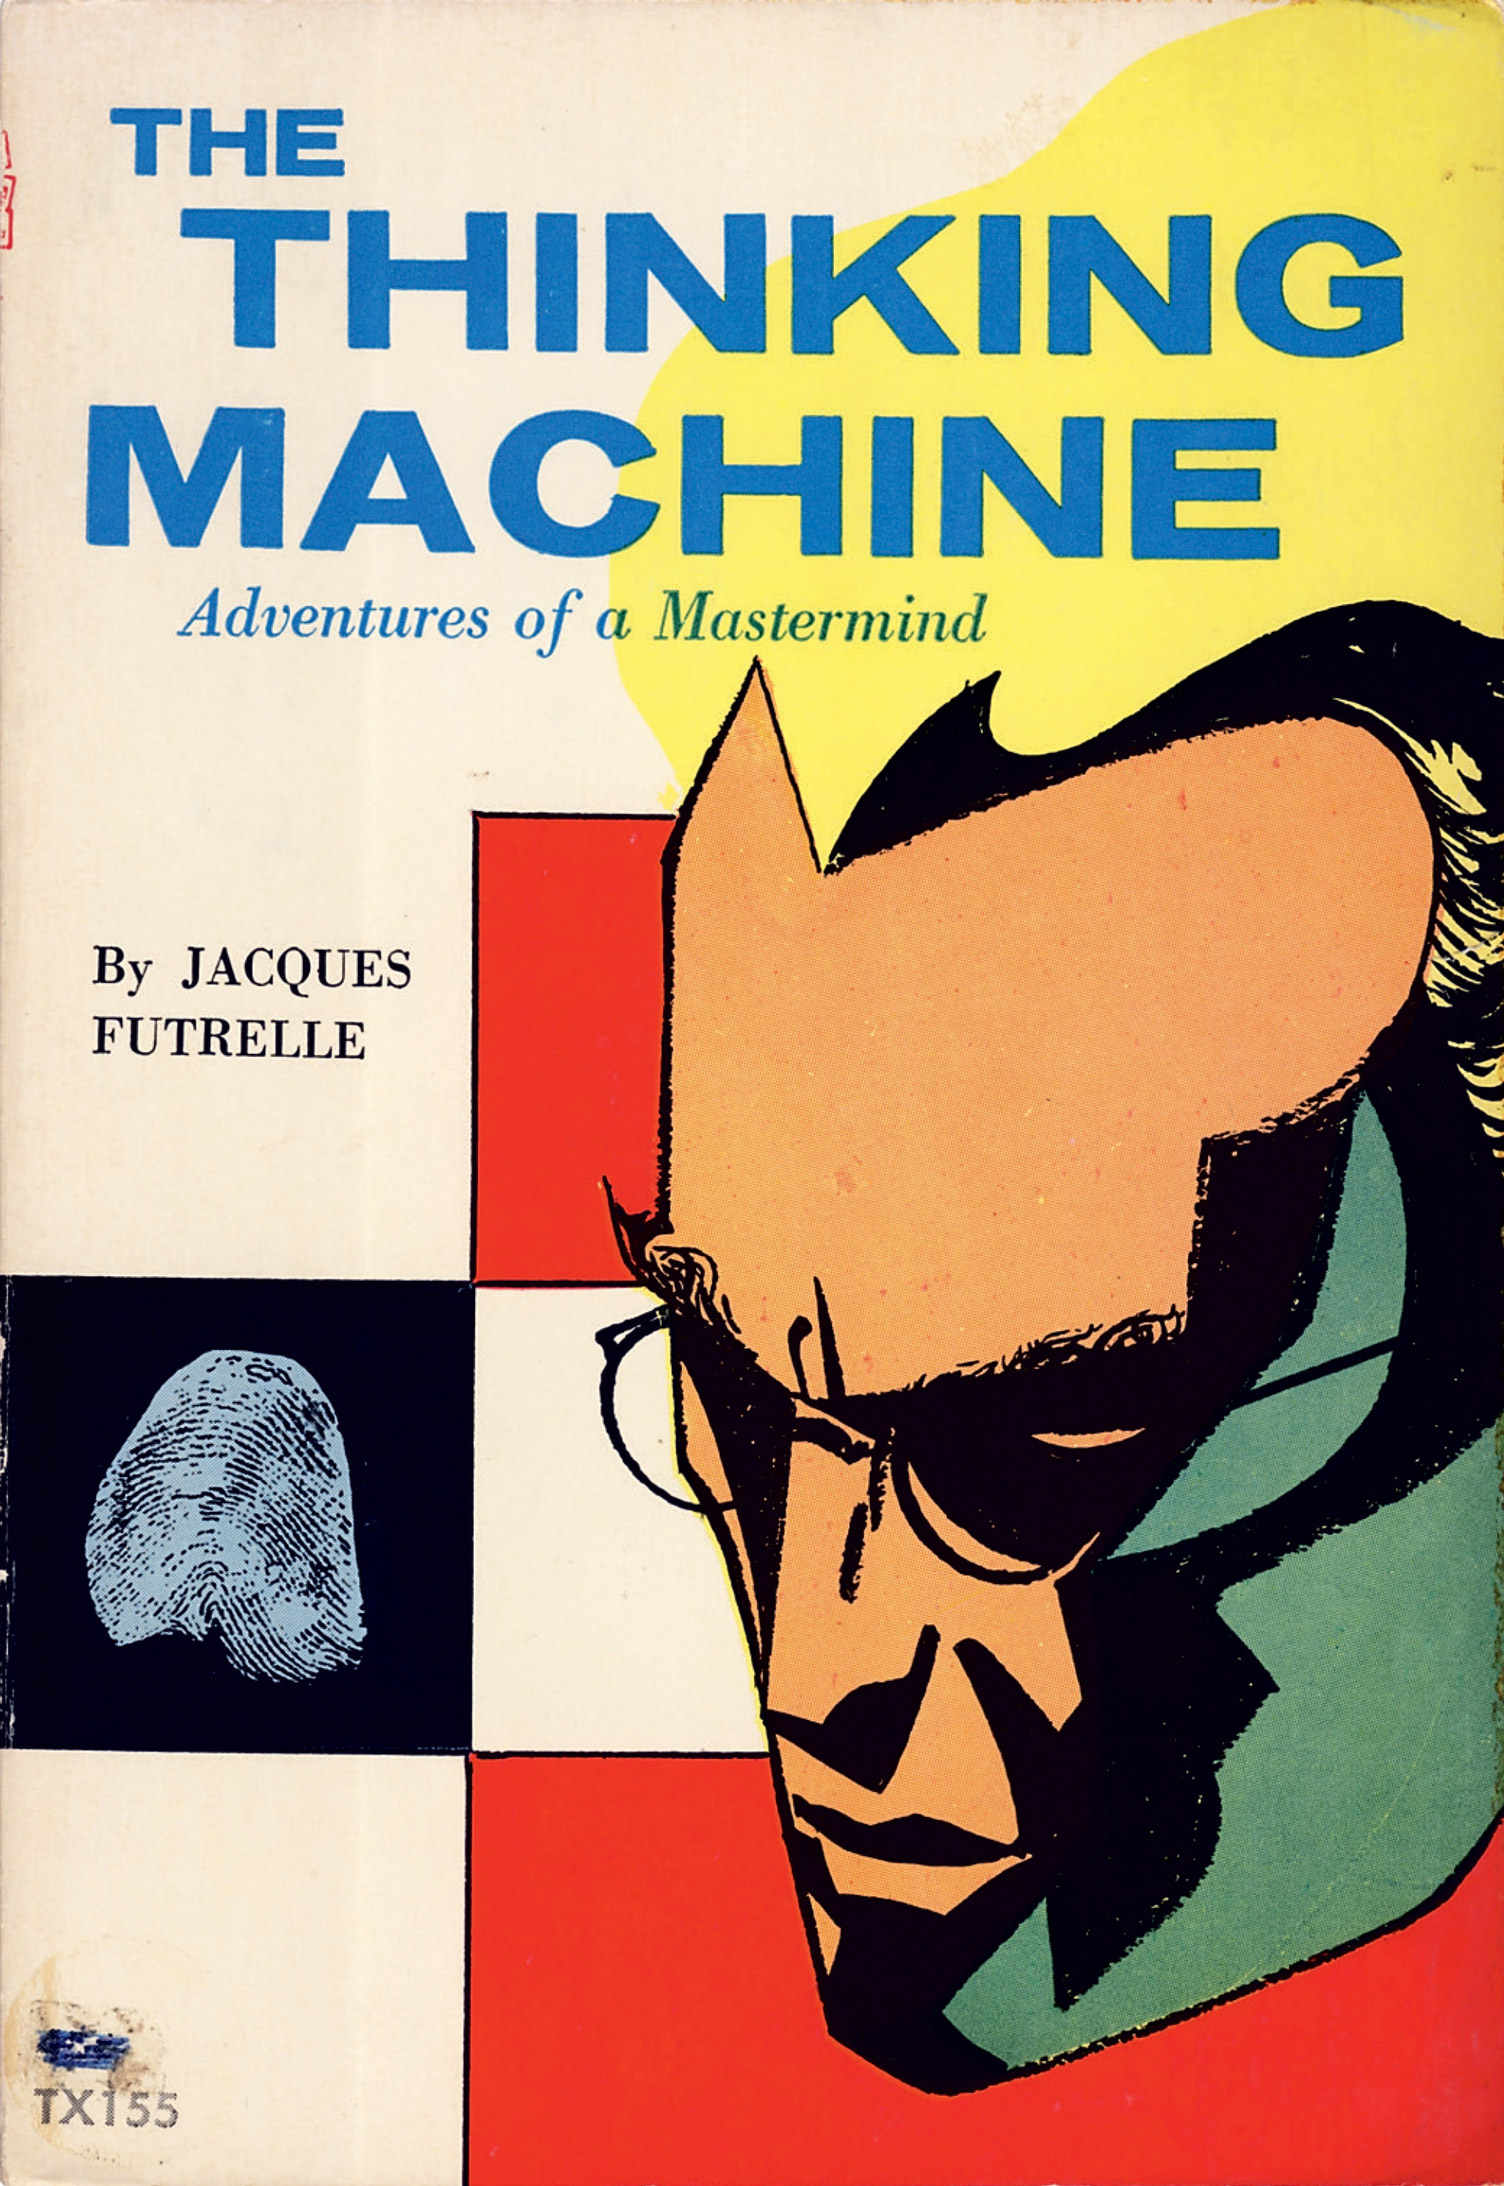 The front cover of Jacques Futrelle’s book “The Thinking Machine: Adventures of a Mastermind.” 